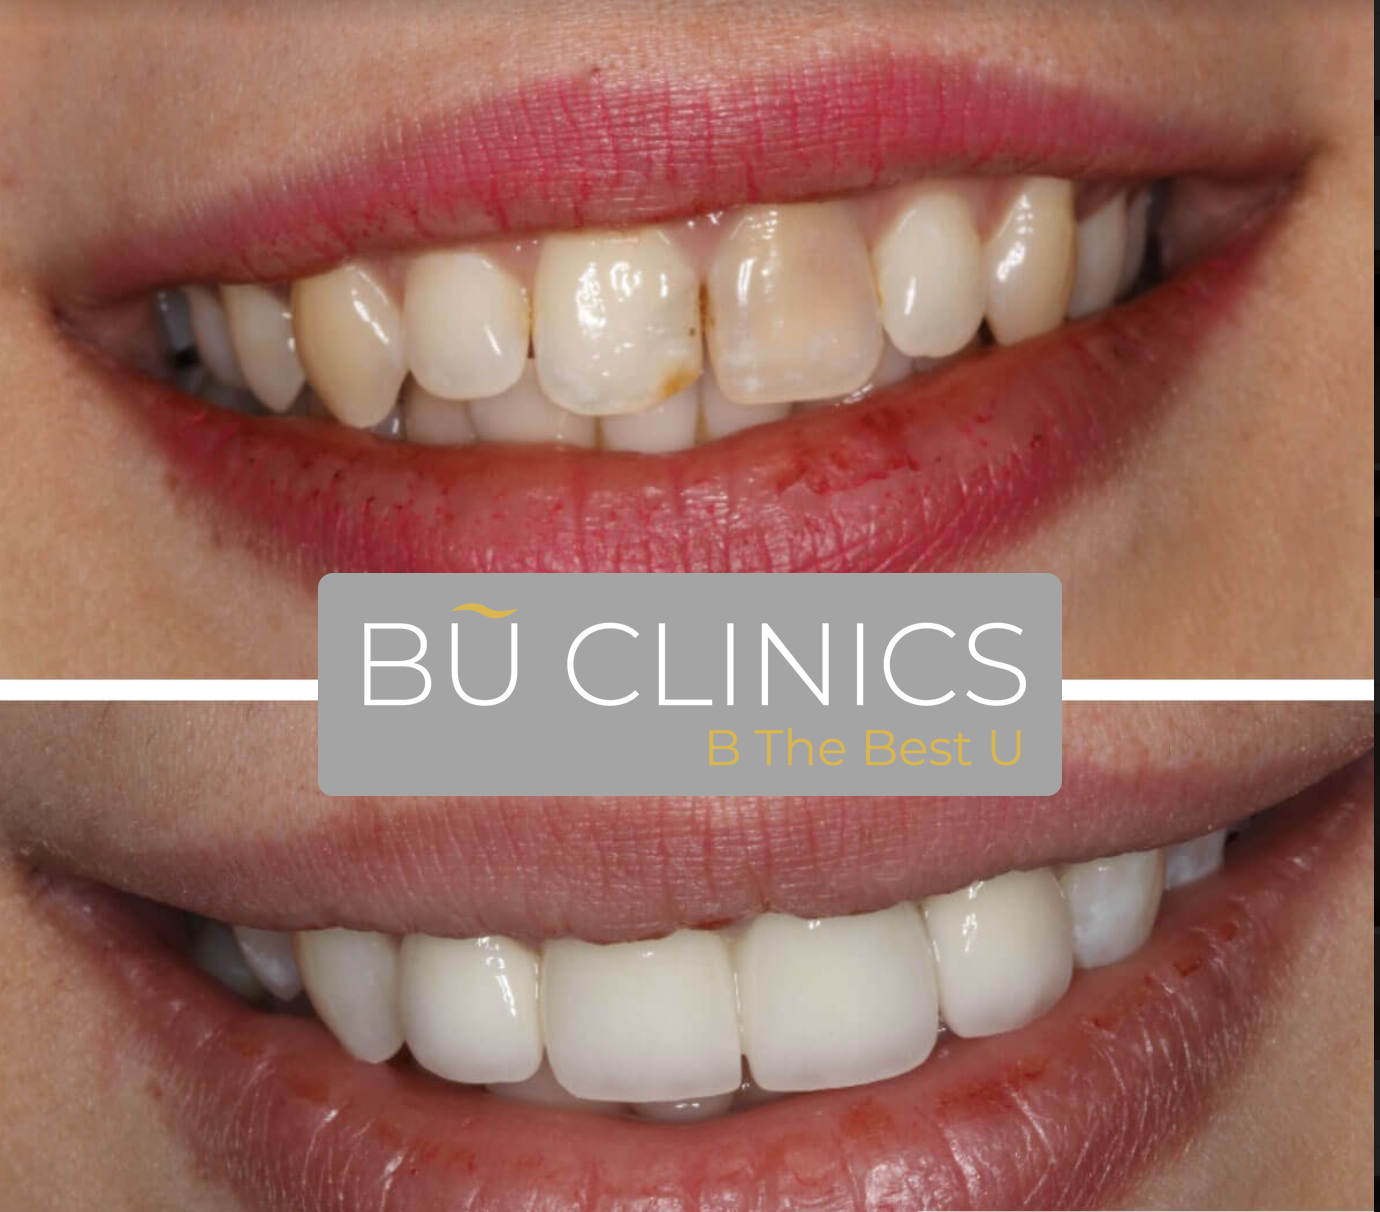 Before & after Hollywood smile treatment in Turkey with BU Clinics